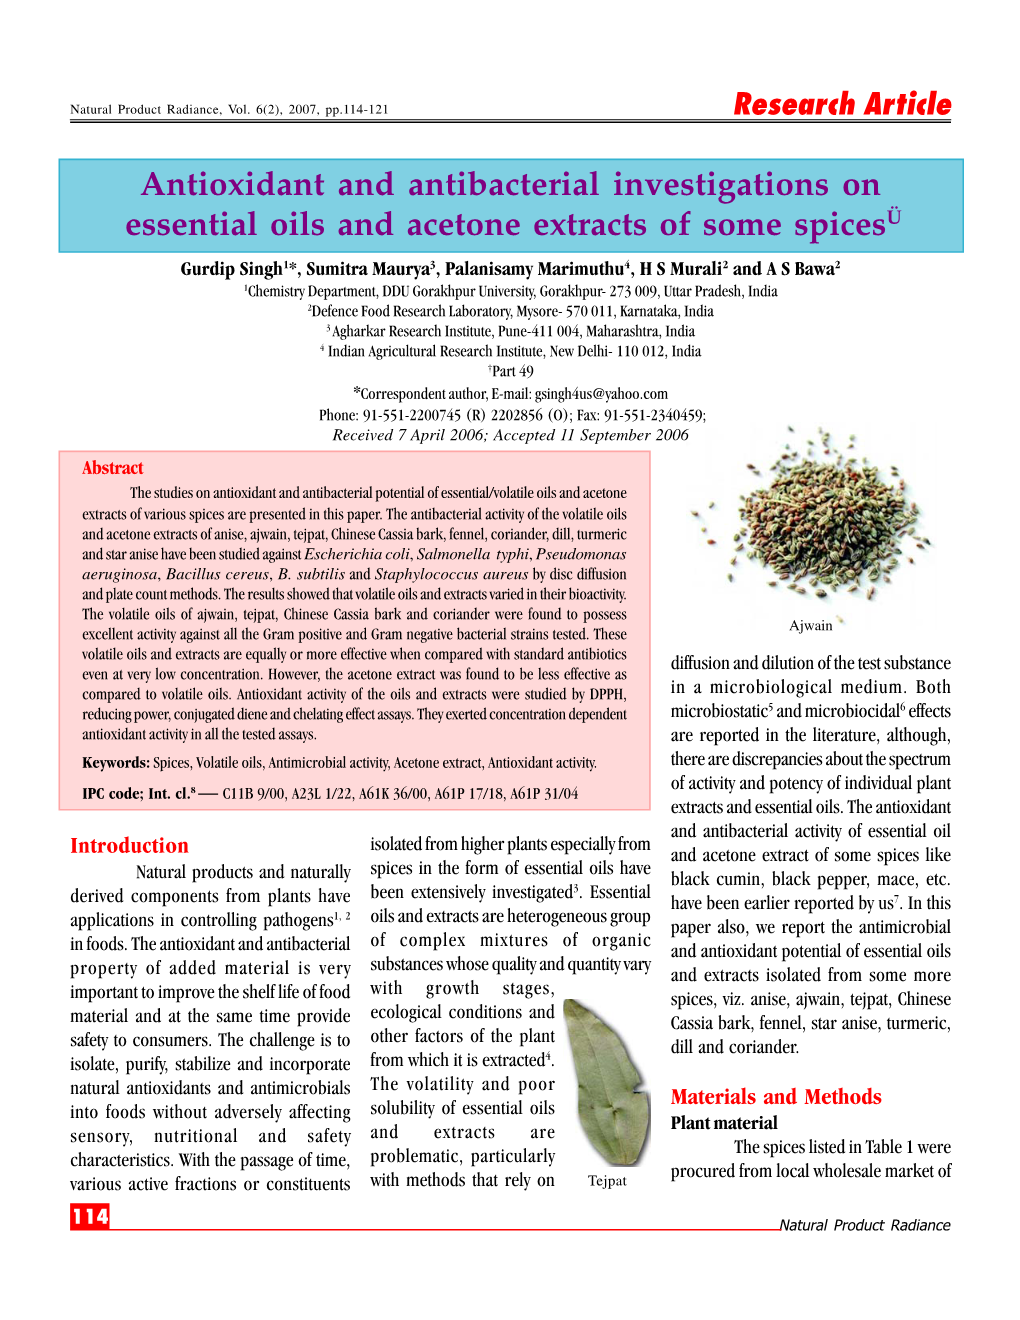 Antioxidant and Antibacterial Investigations on Essential Oils And